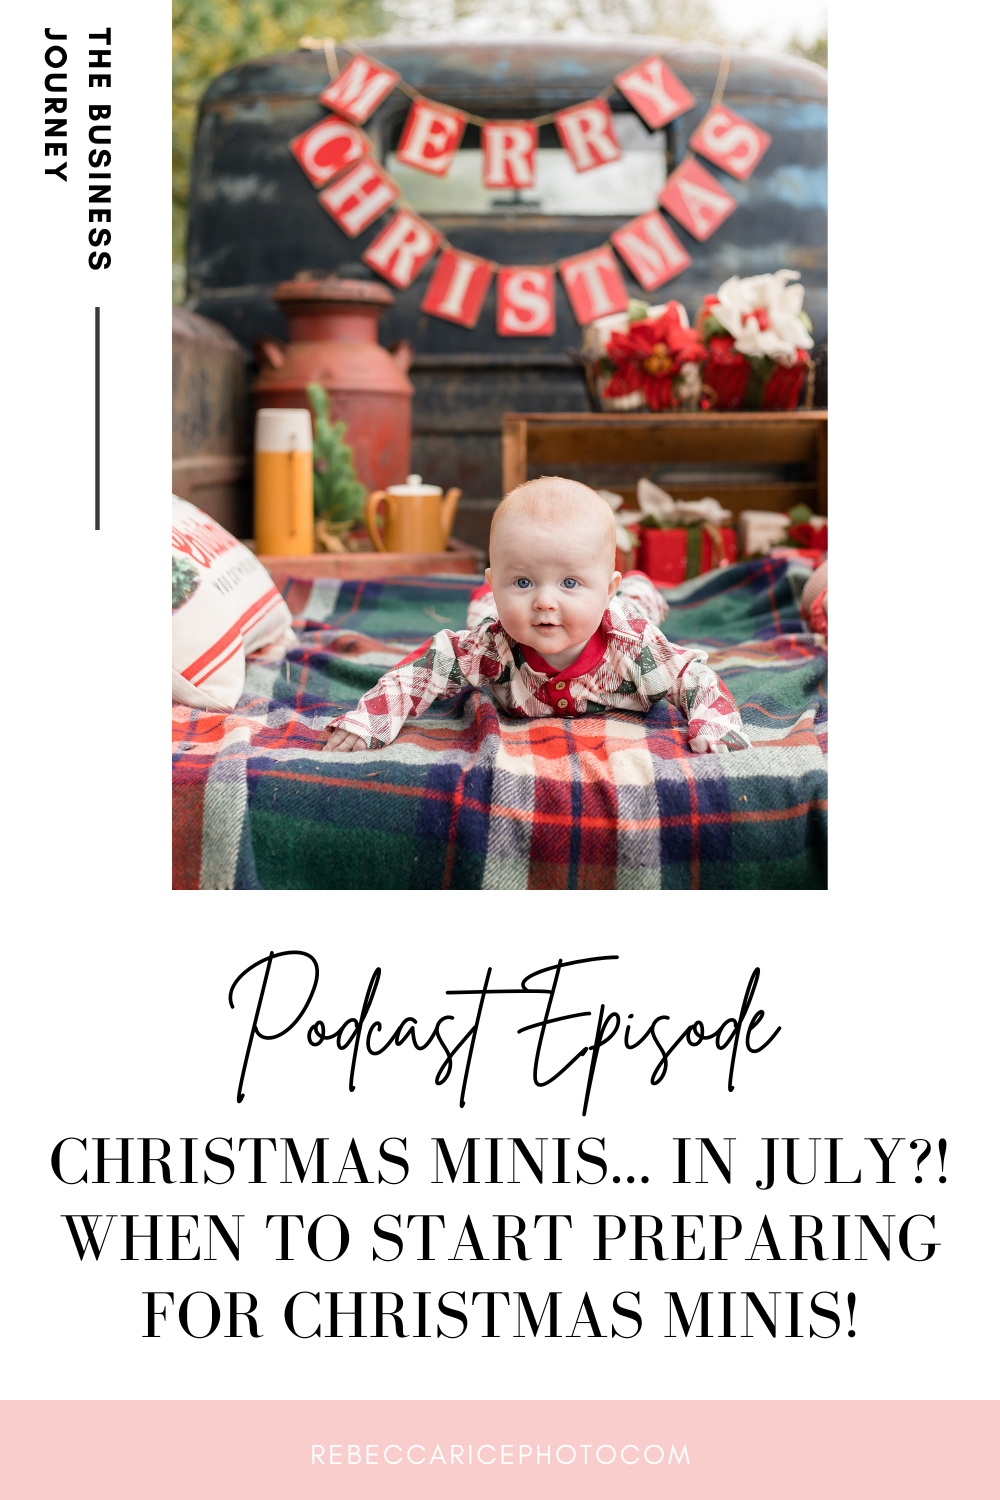 Christmas Minis in July?! When to start preparing for Christmas Minis!